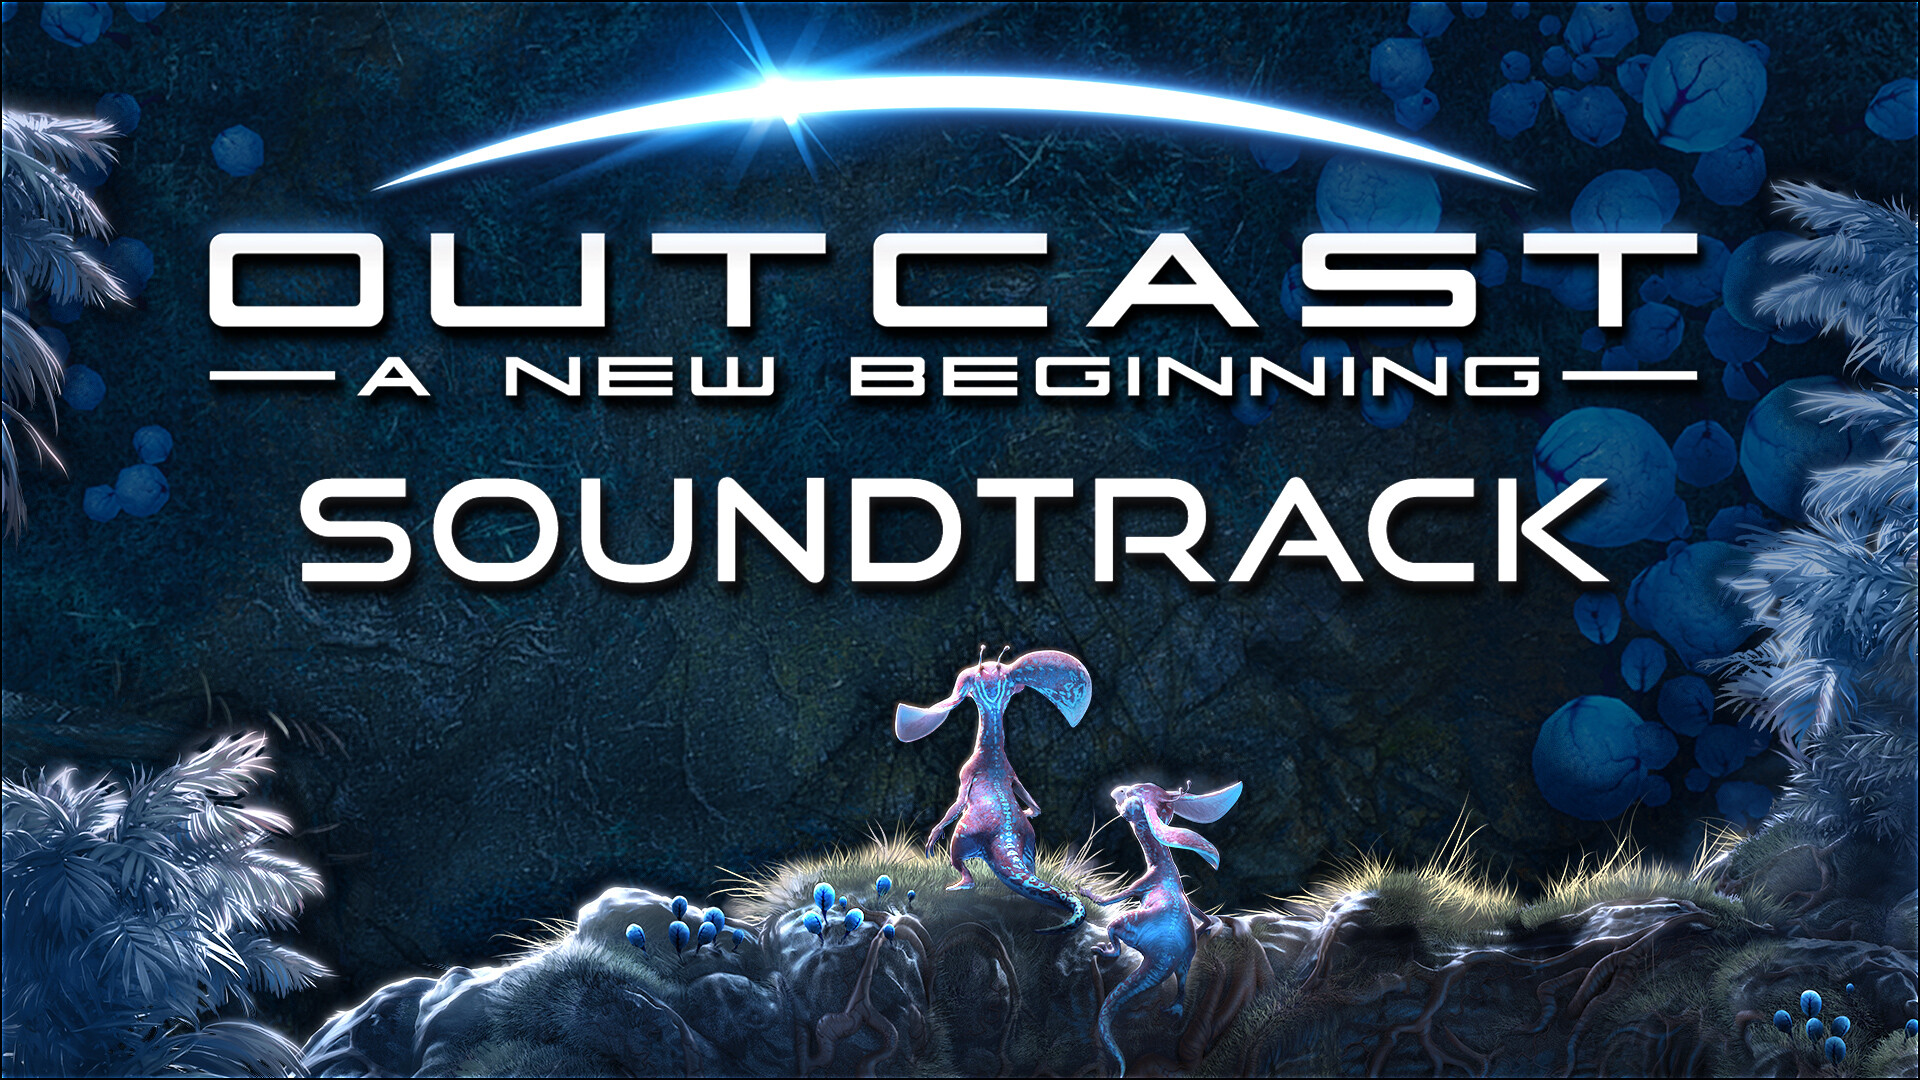 Outcast - A New Beginning Soundtrack